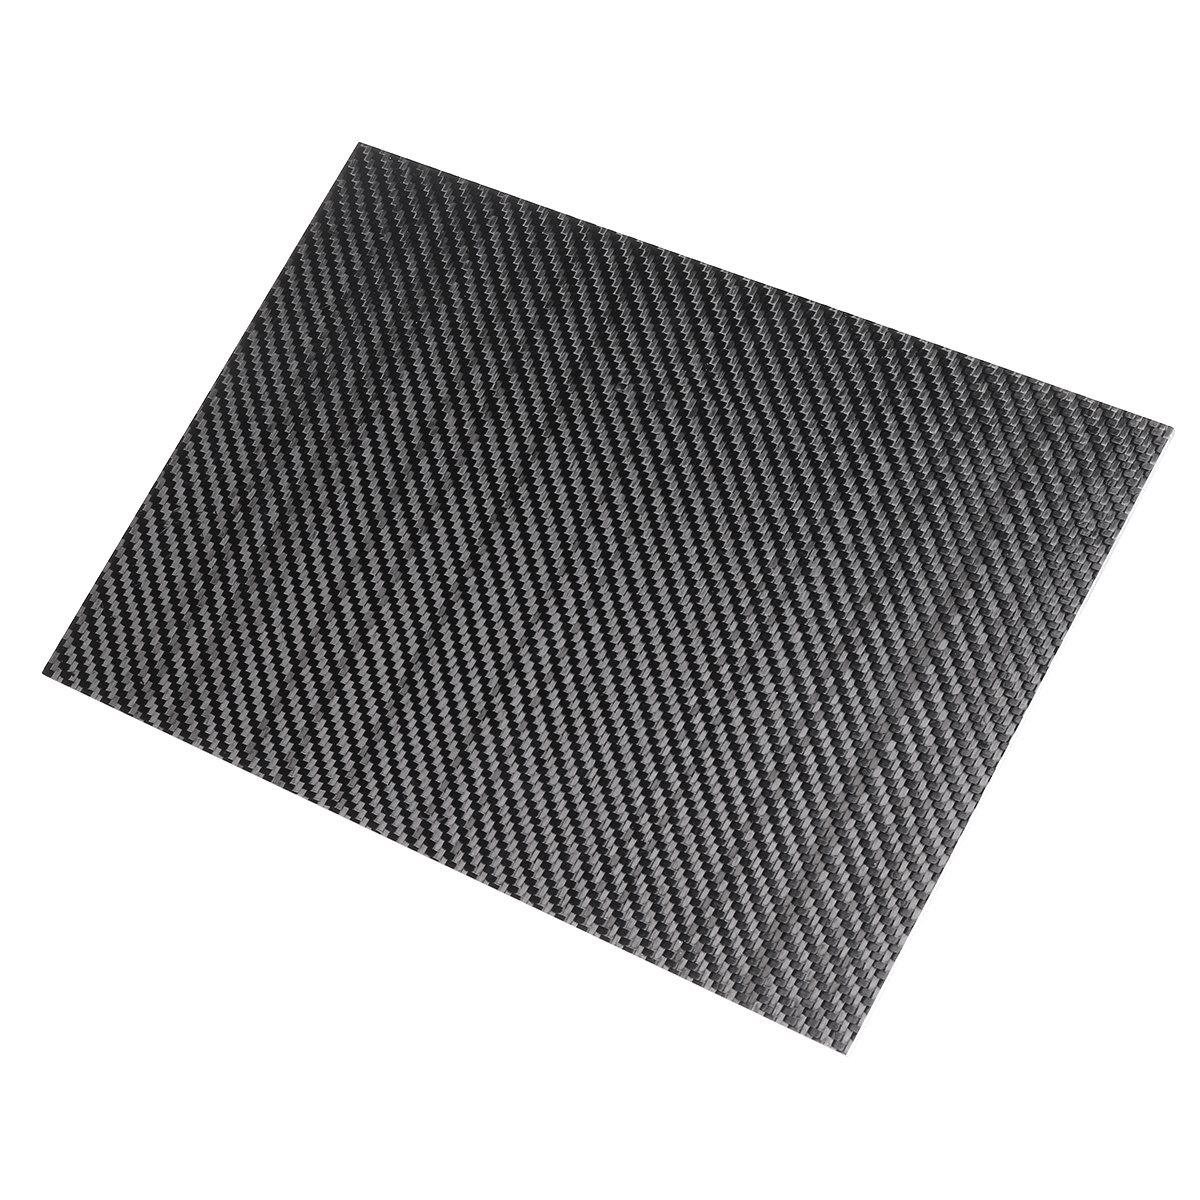 

250x420x(0.5-5)mm 3K Black Twill Weave Carbon Fiber Plate Sheet Glossy Carbon Fiber Board Panel High Composite RC Material